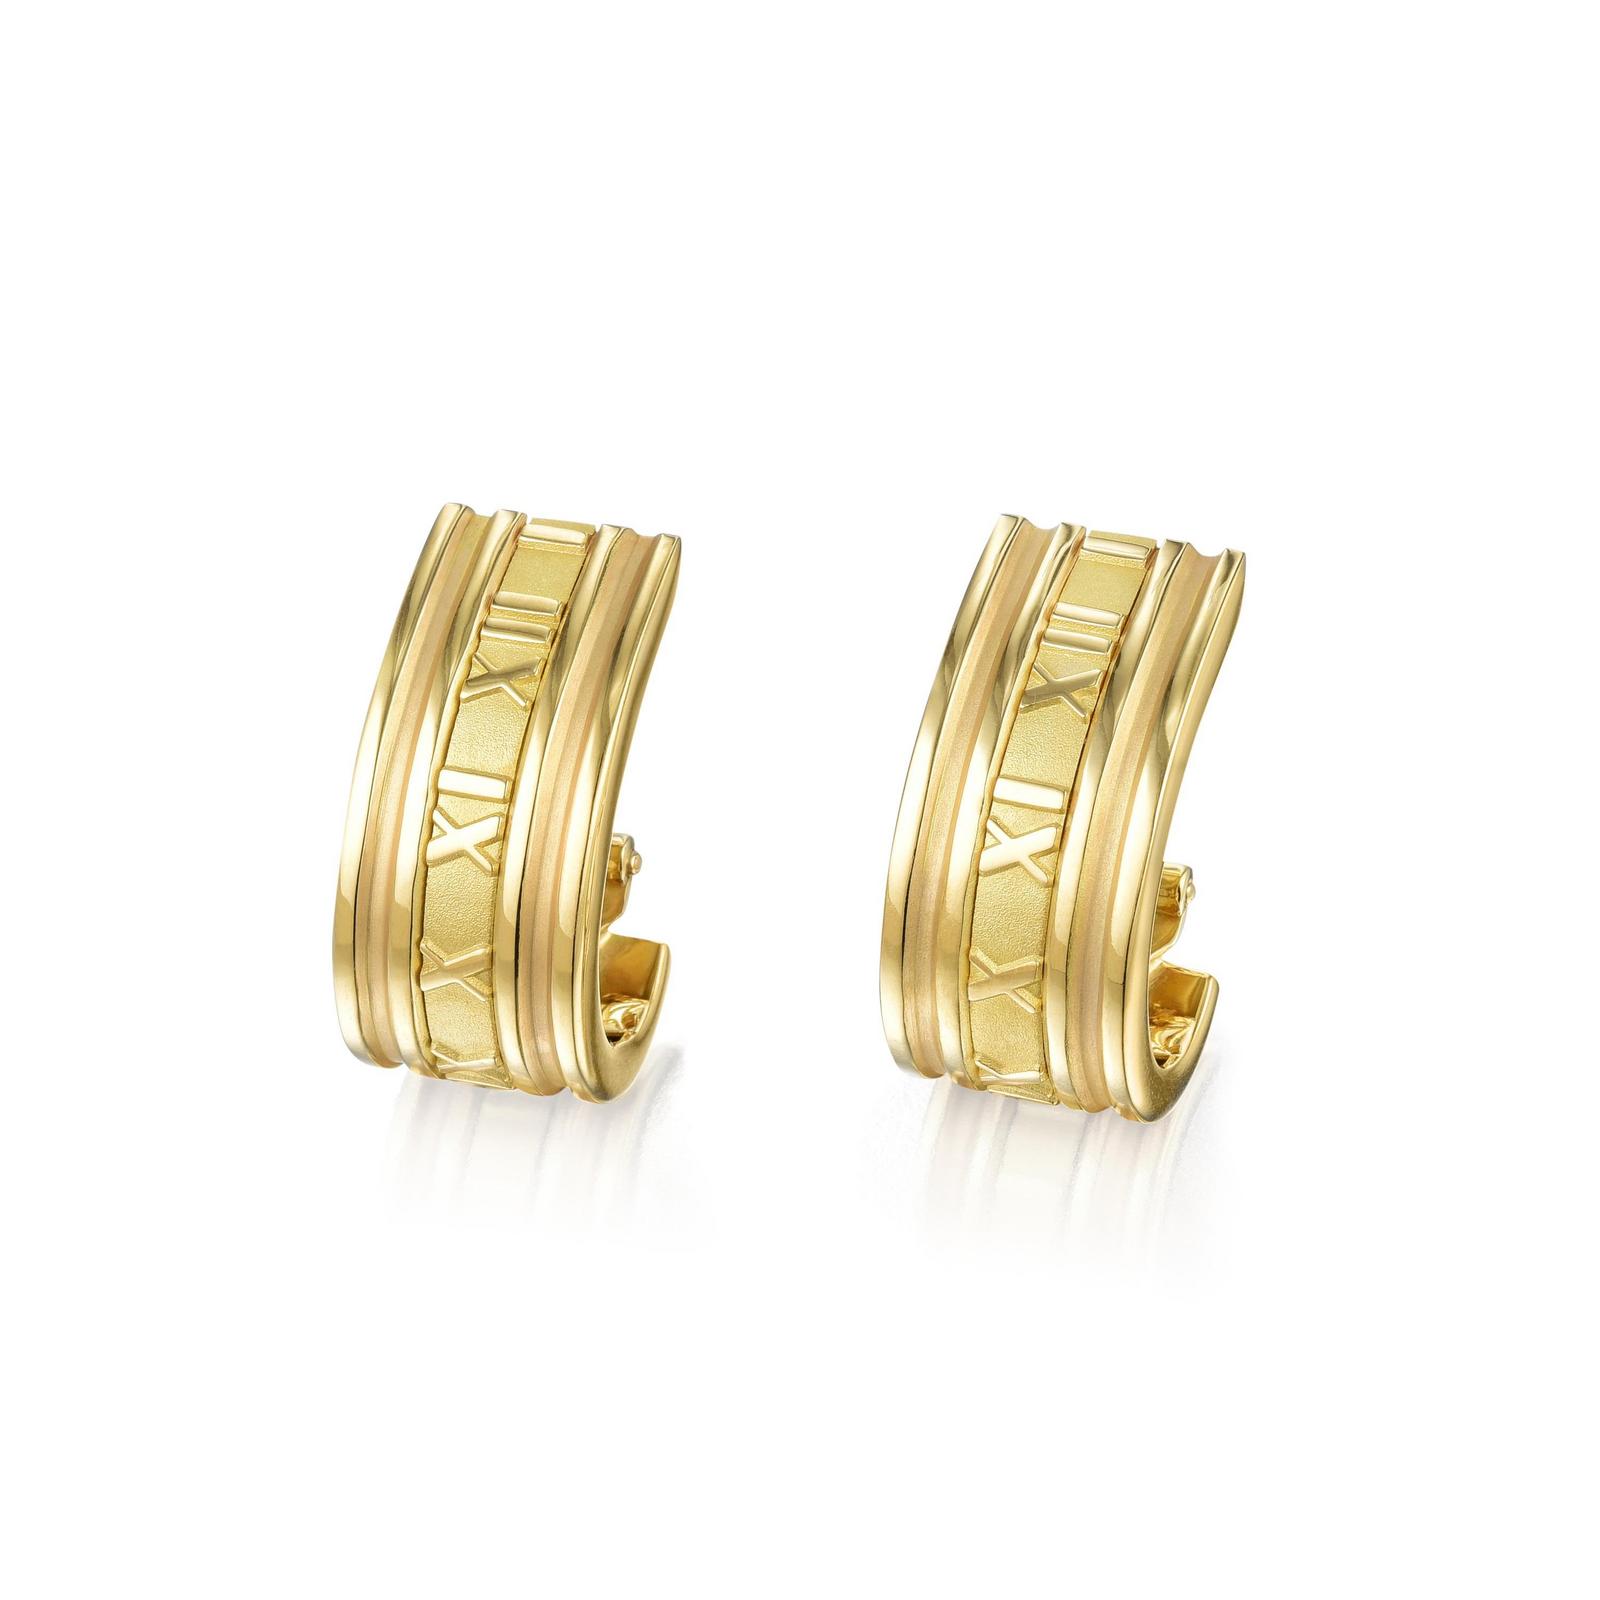 Sold at Auction: TIFFANY &CO ,18K GOLD ATLAS COLLECTION ROMAN NUMERALS RING